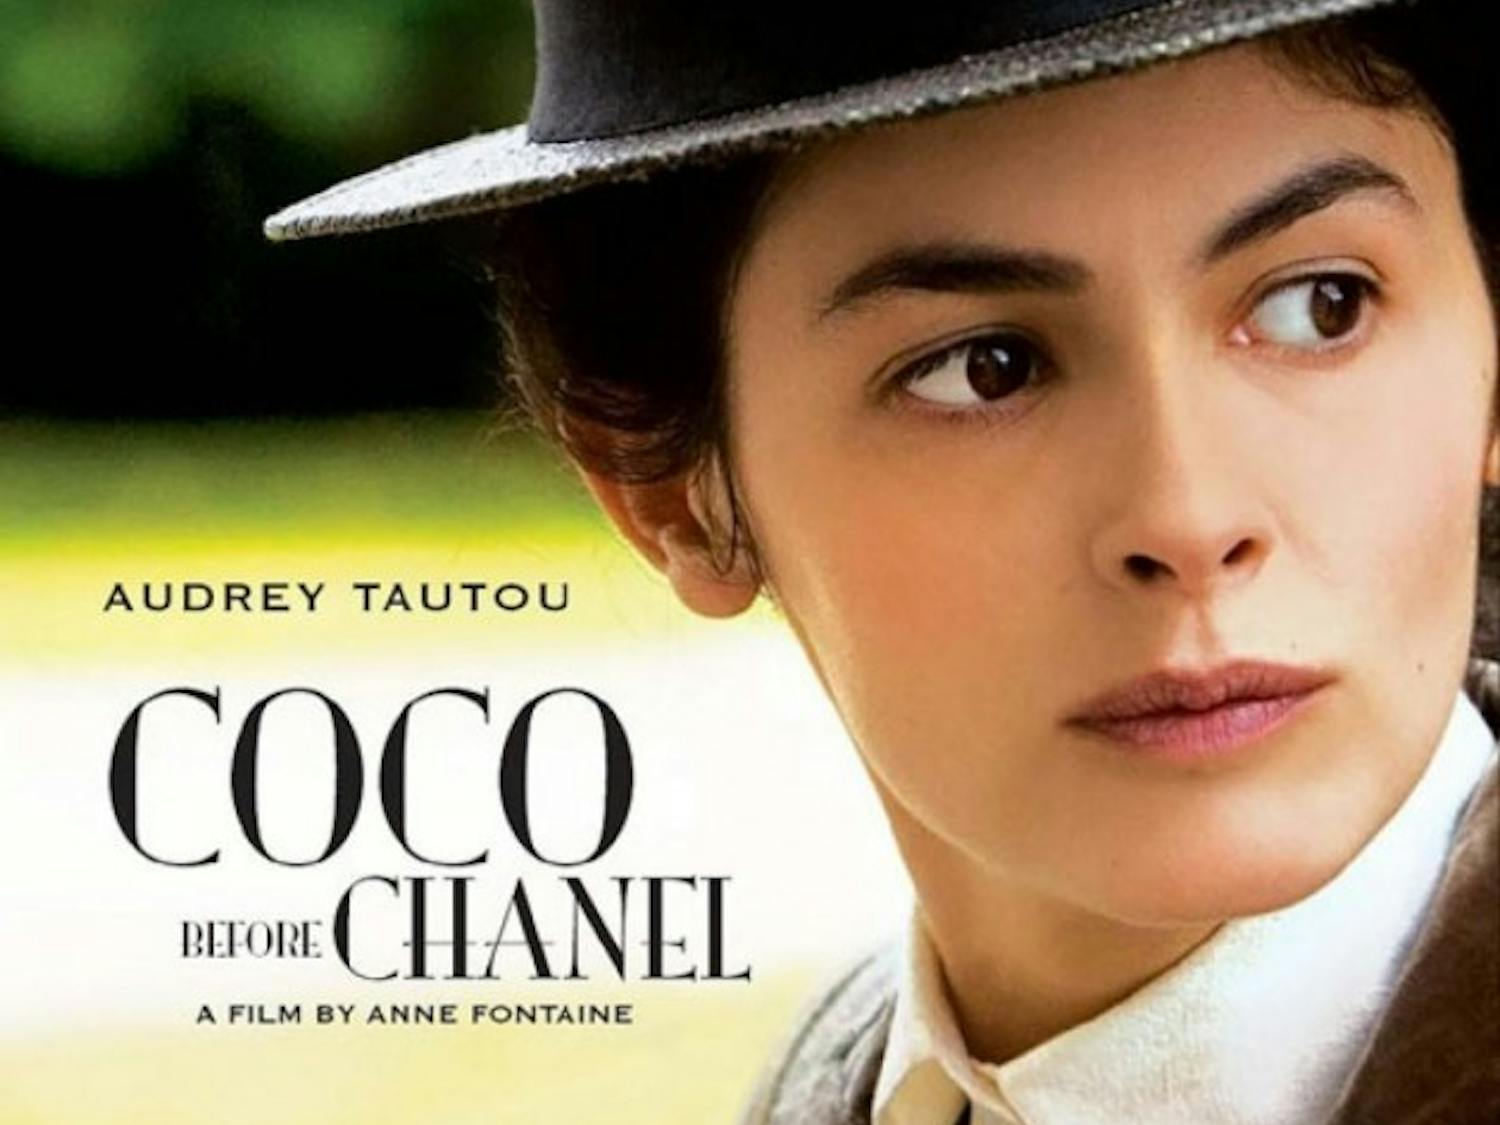 The French Connection&rsquo;s held a viewing of Coco&nbsp;Before Chanel&nbsp;
a movie that tells&nbsp;tale of the legendary fashion icon&rsquo;s rise
from orphan to sought-after fashionista. Courtesy of Haut et Court